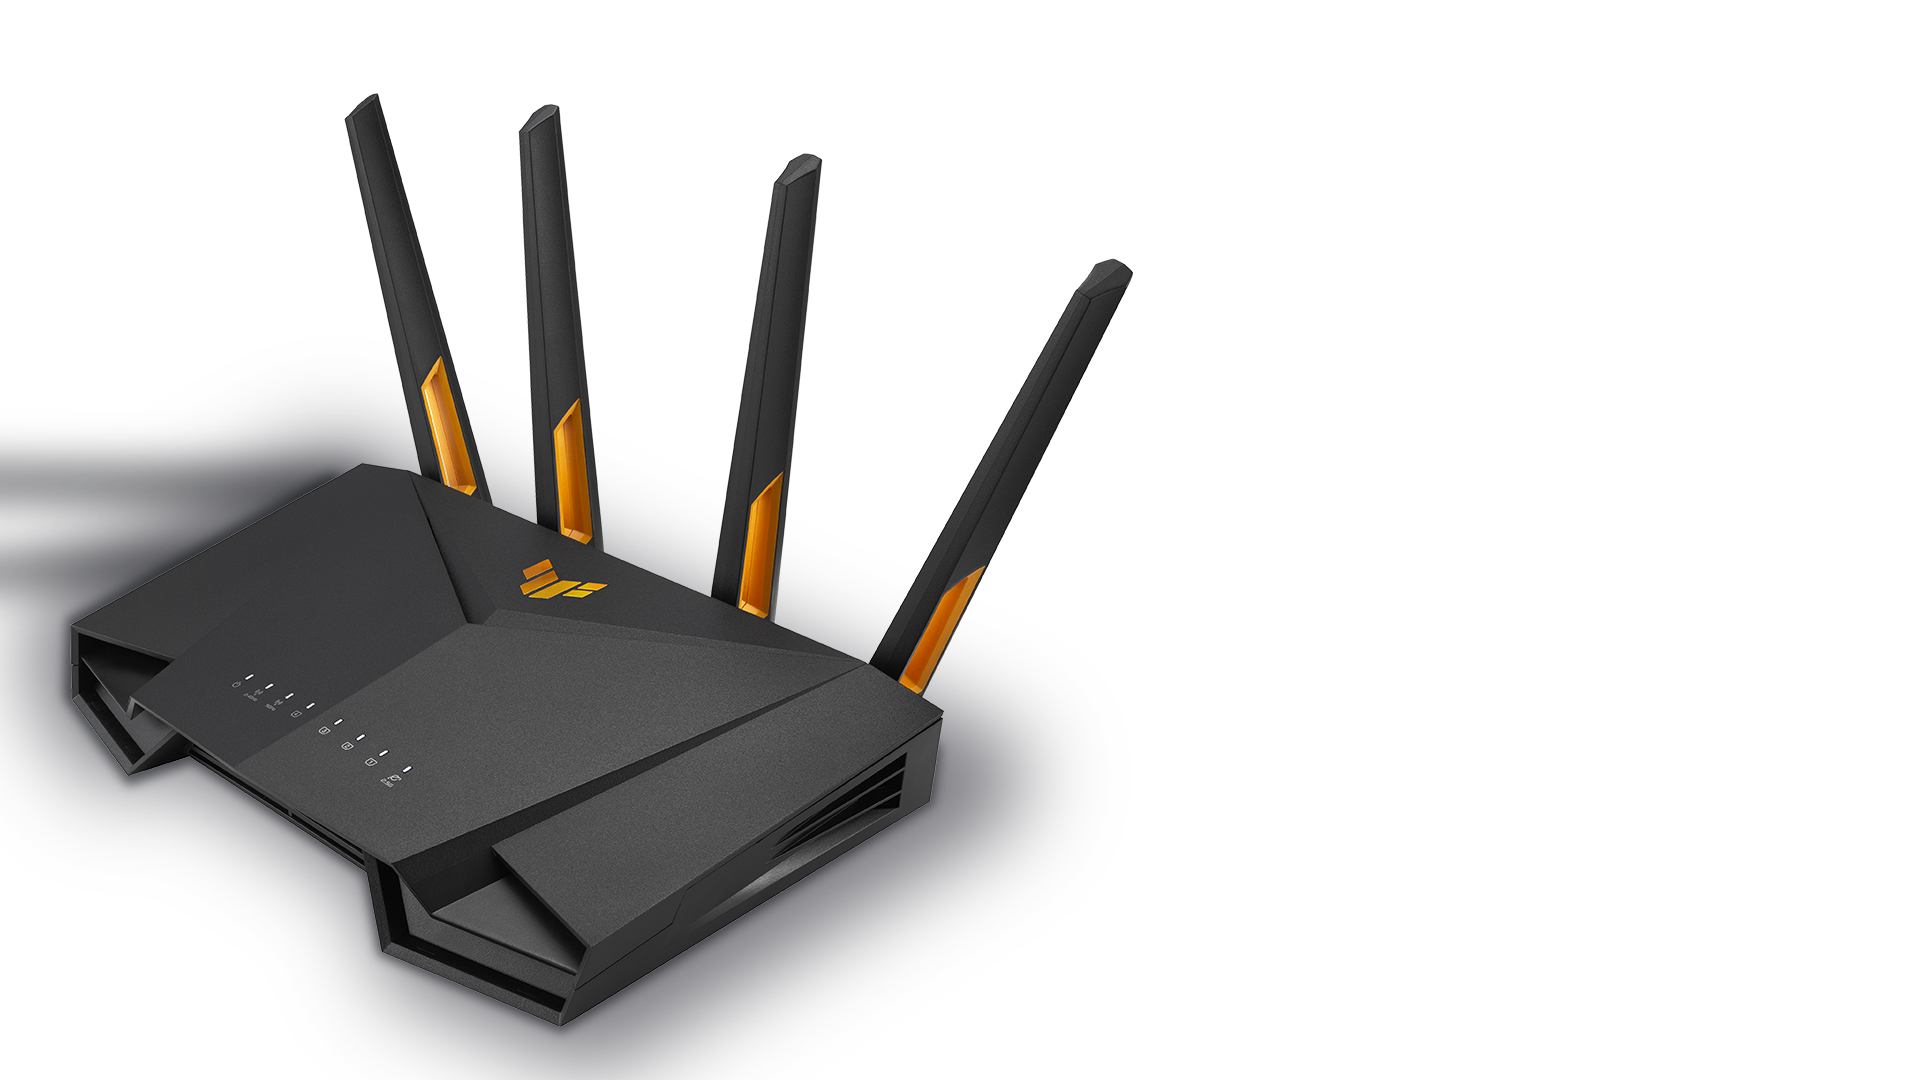 TUF Gaming AX4200｜WiFi Routers｜ASUS Global